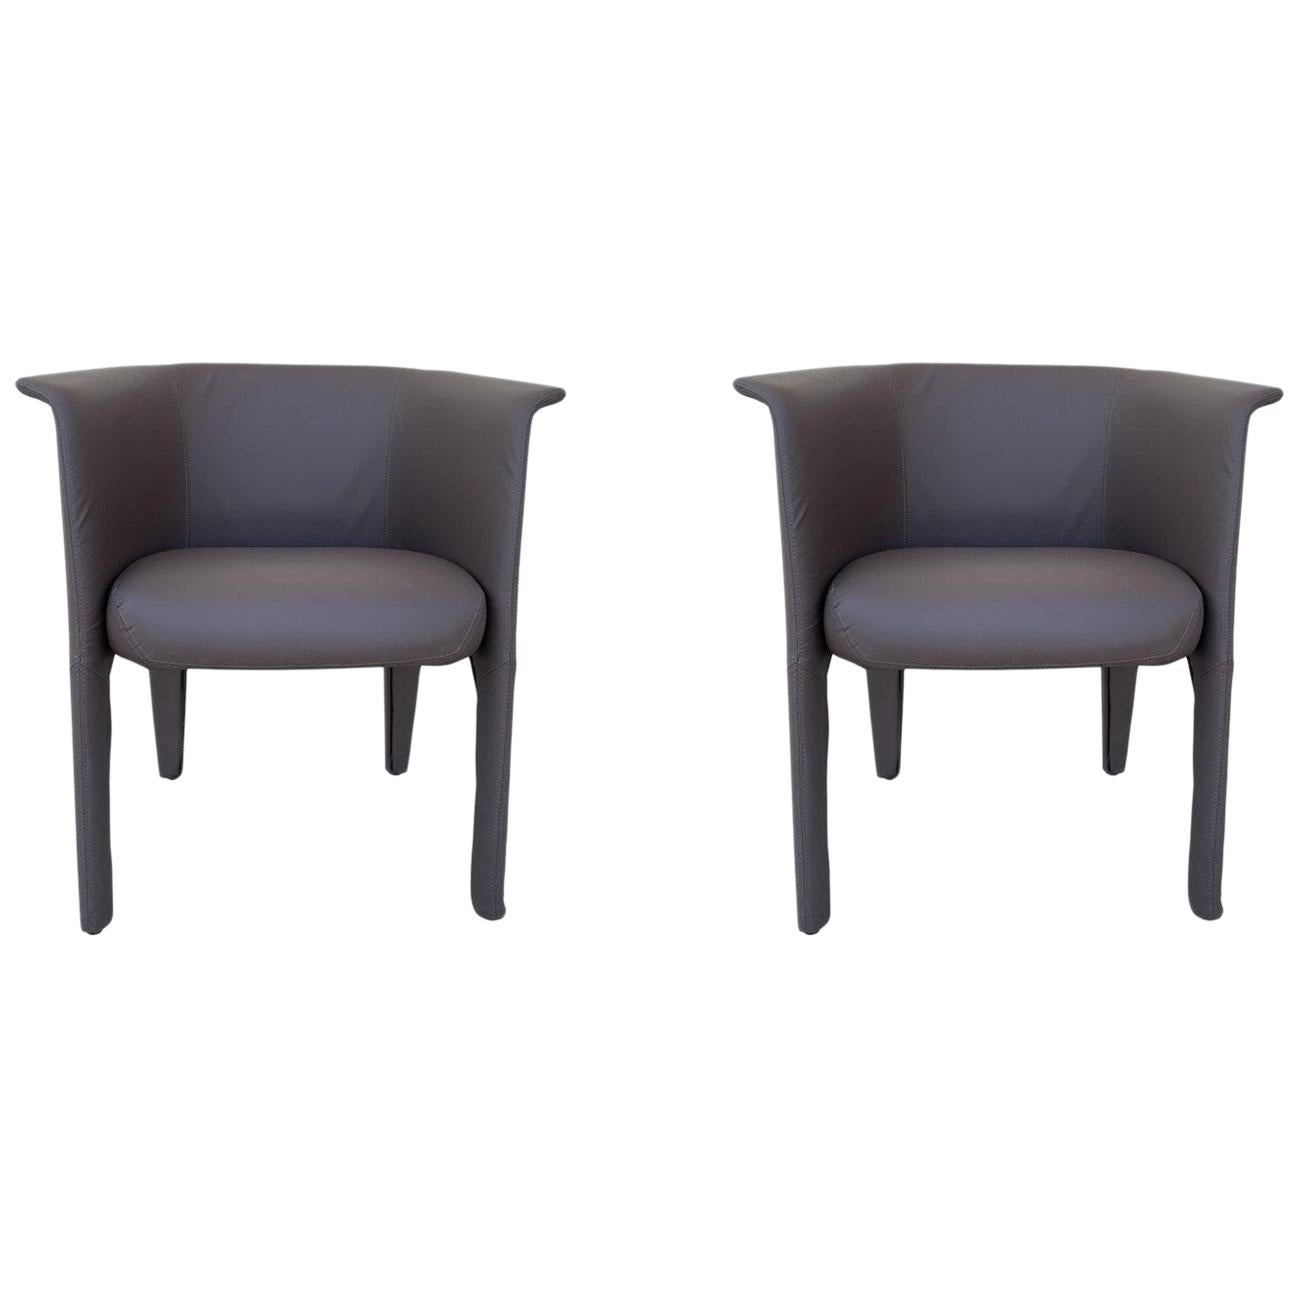 Pair of Italian Barrel Chairs in Faux Leather